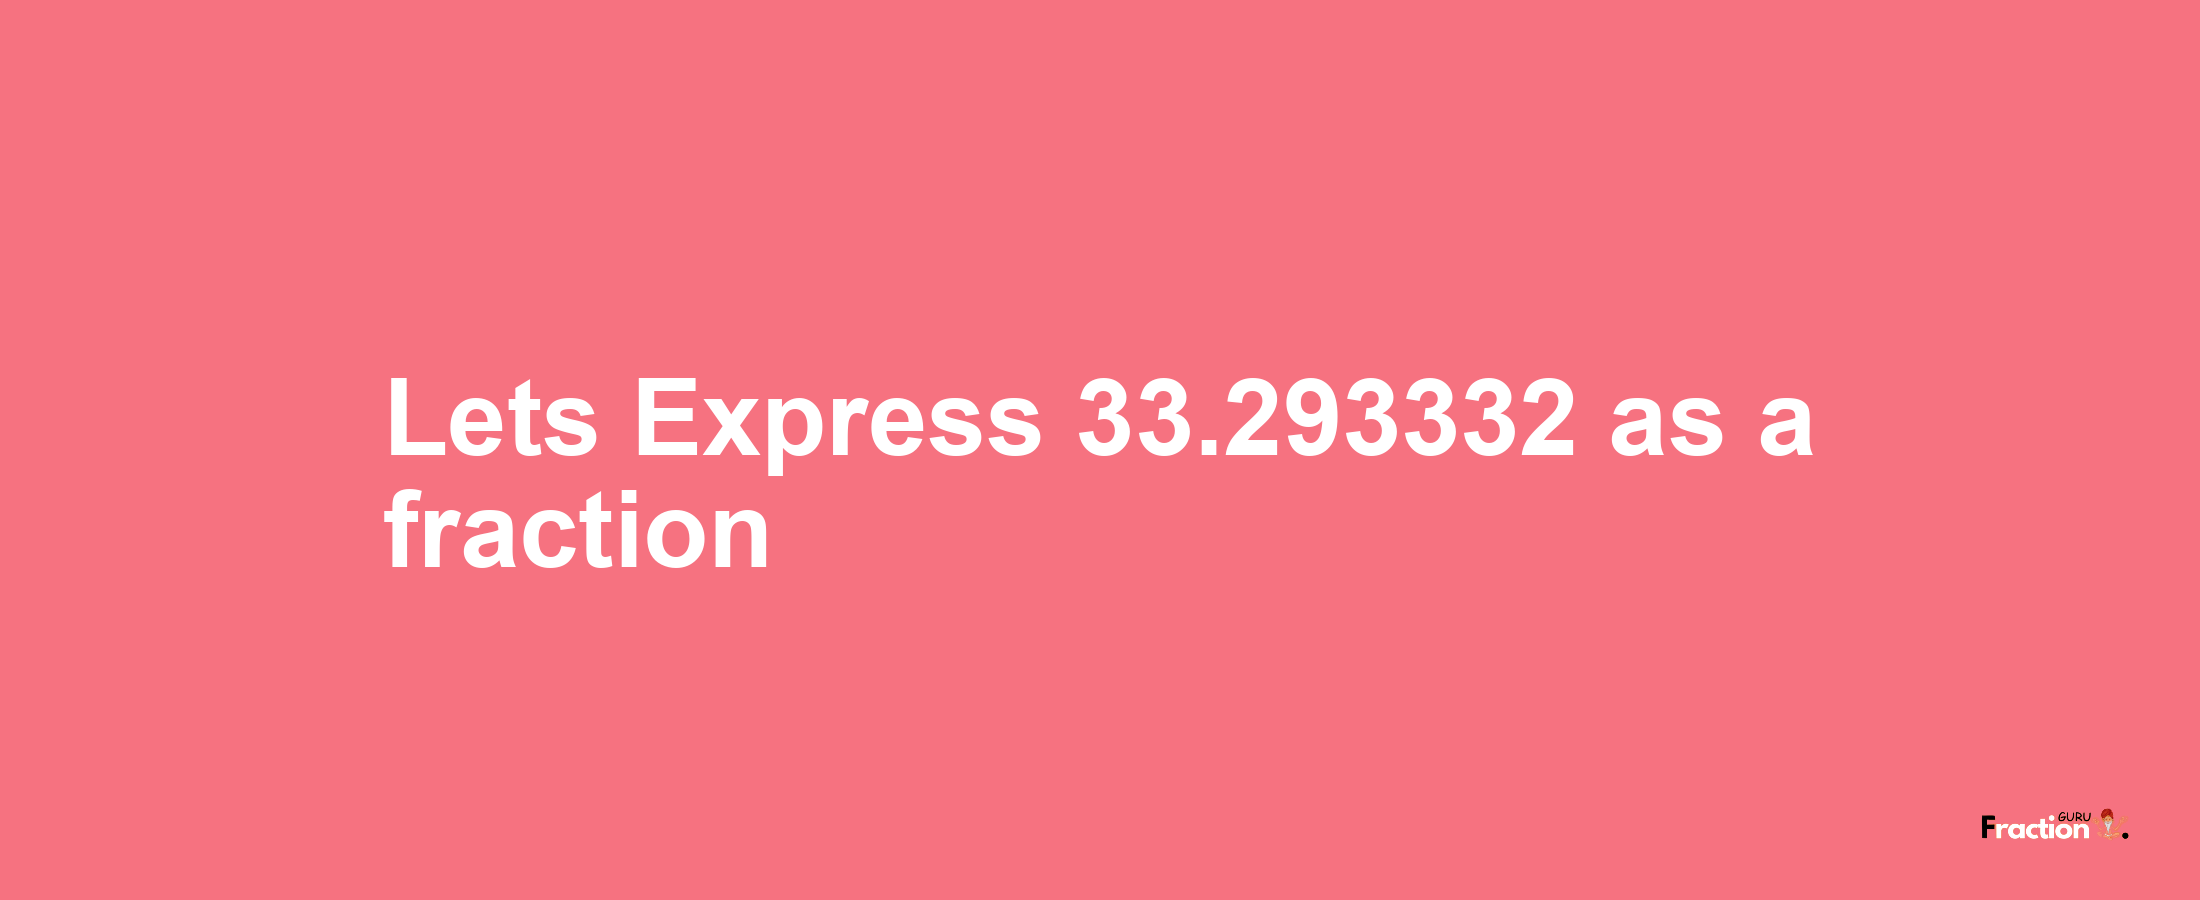 Lets Express 33.293332 as afraction